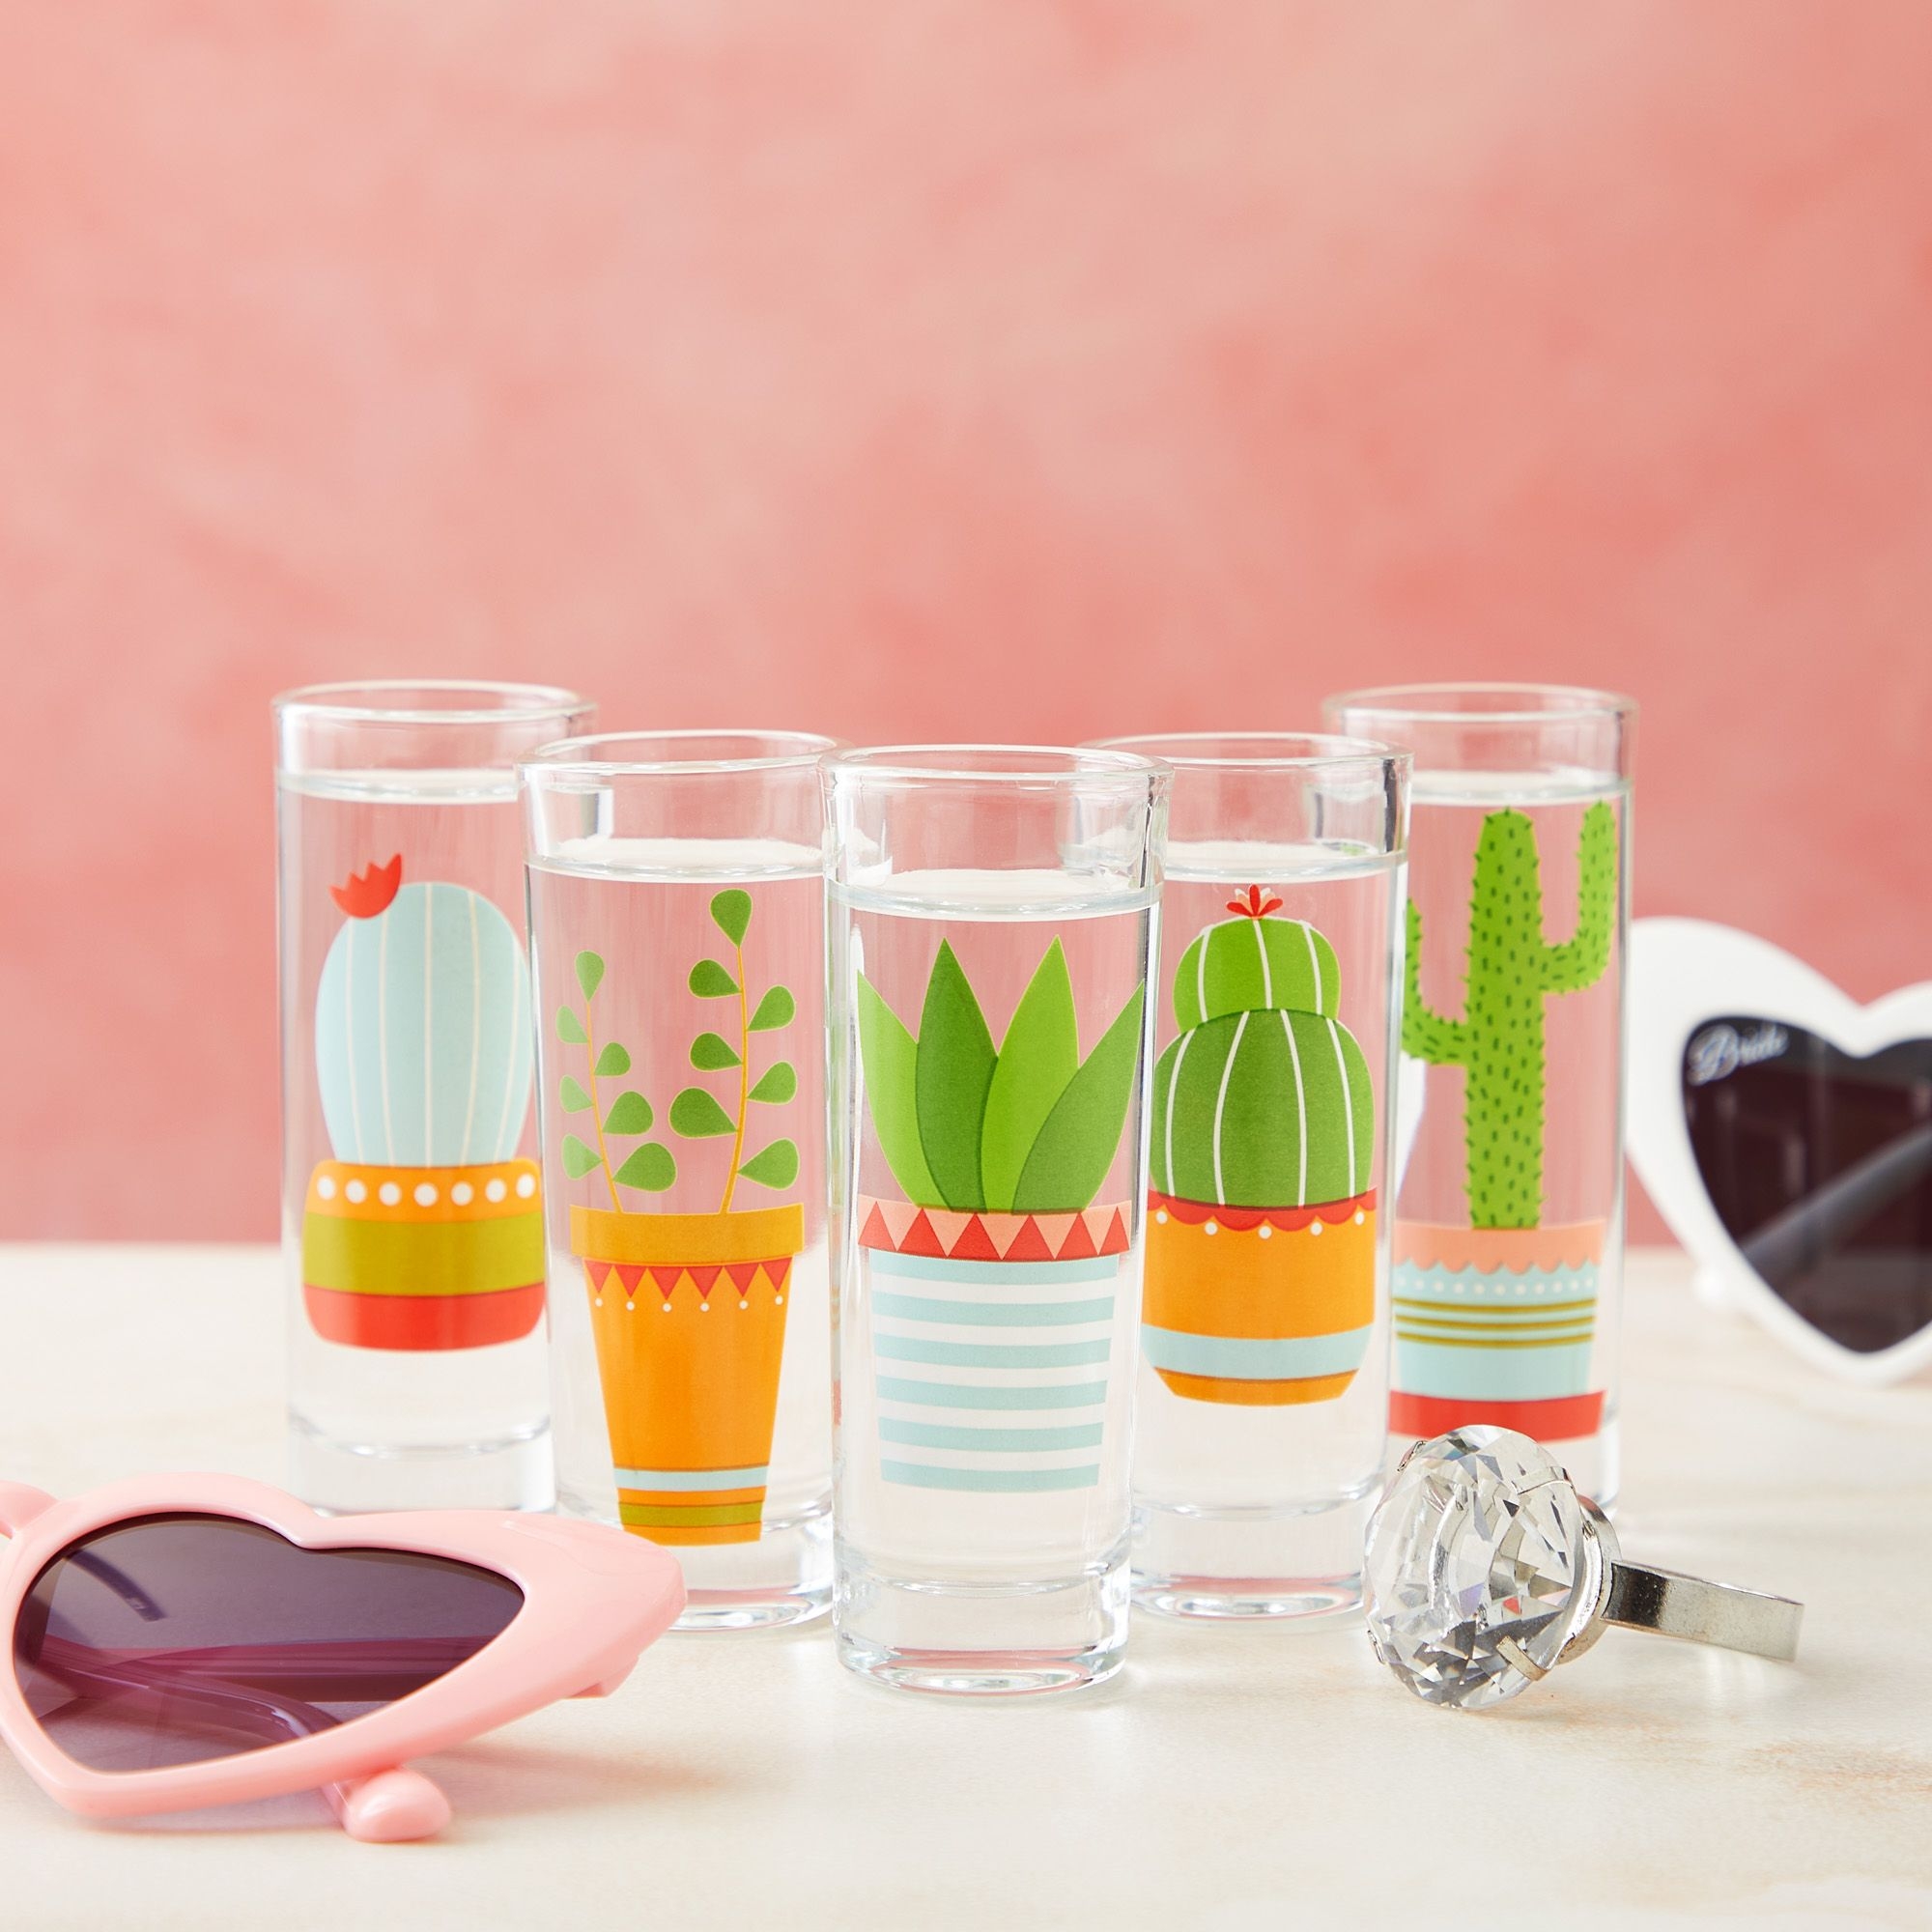 5 Pack Shot Glasses Set with Cactus Designs for Bachelorette, Fiesta Supplies, Western-Themed Party, Round, Decorative Shot Glasses with Heavy Base for Tequila, Whiskey, Vodka (2 oz) - image 3 of 10